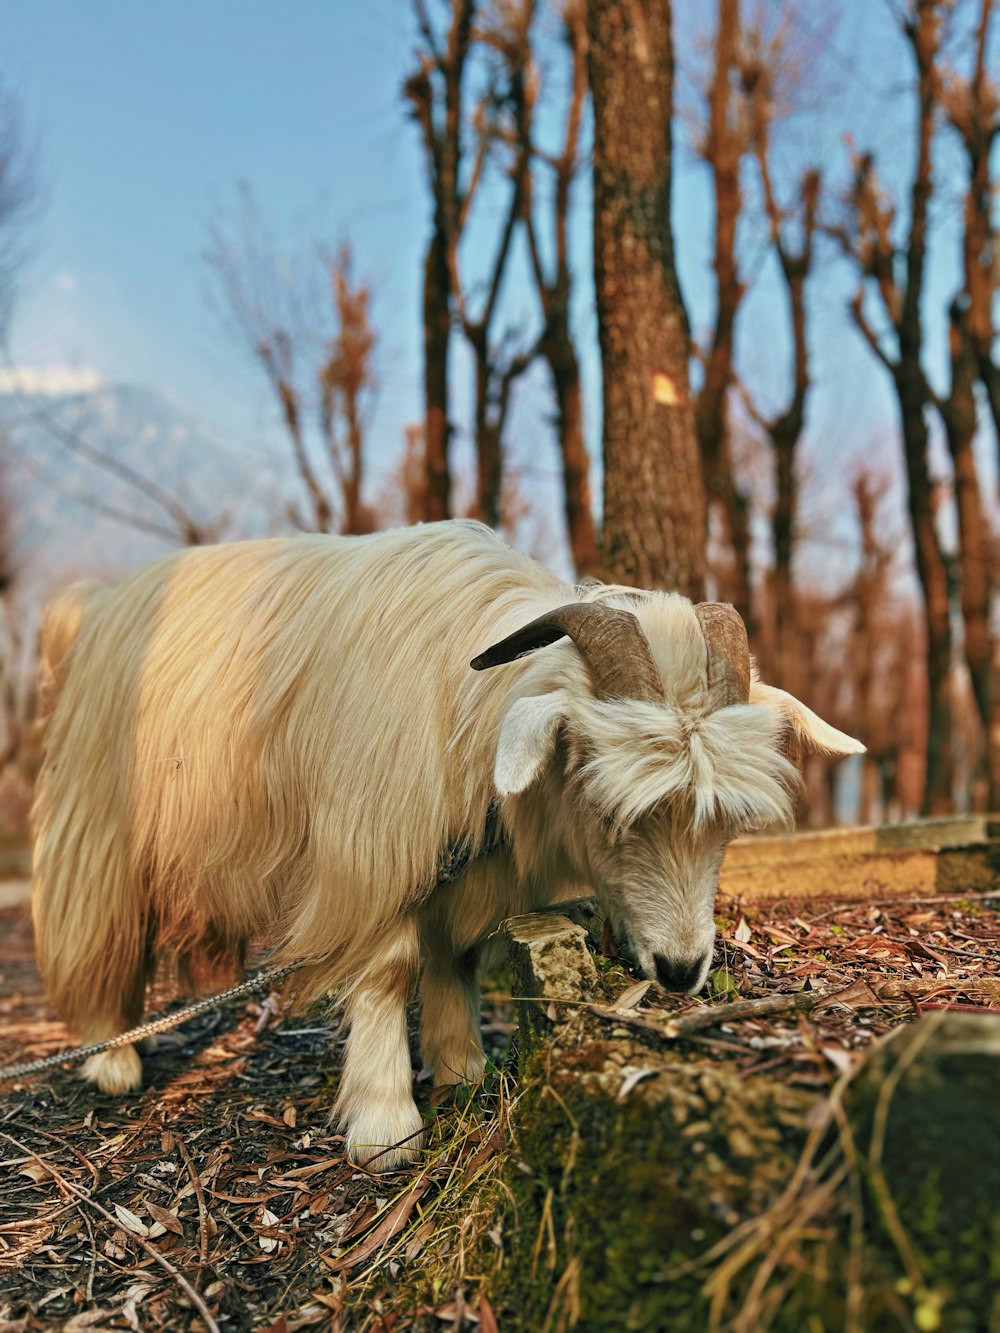 a goat with long hair standing in a wooded area